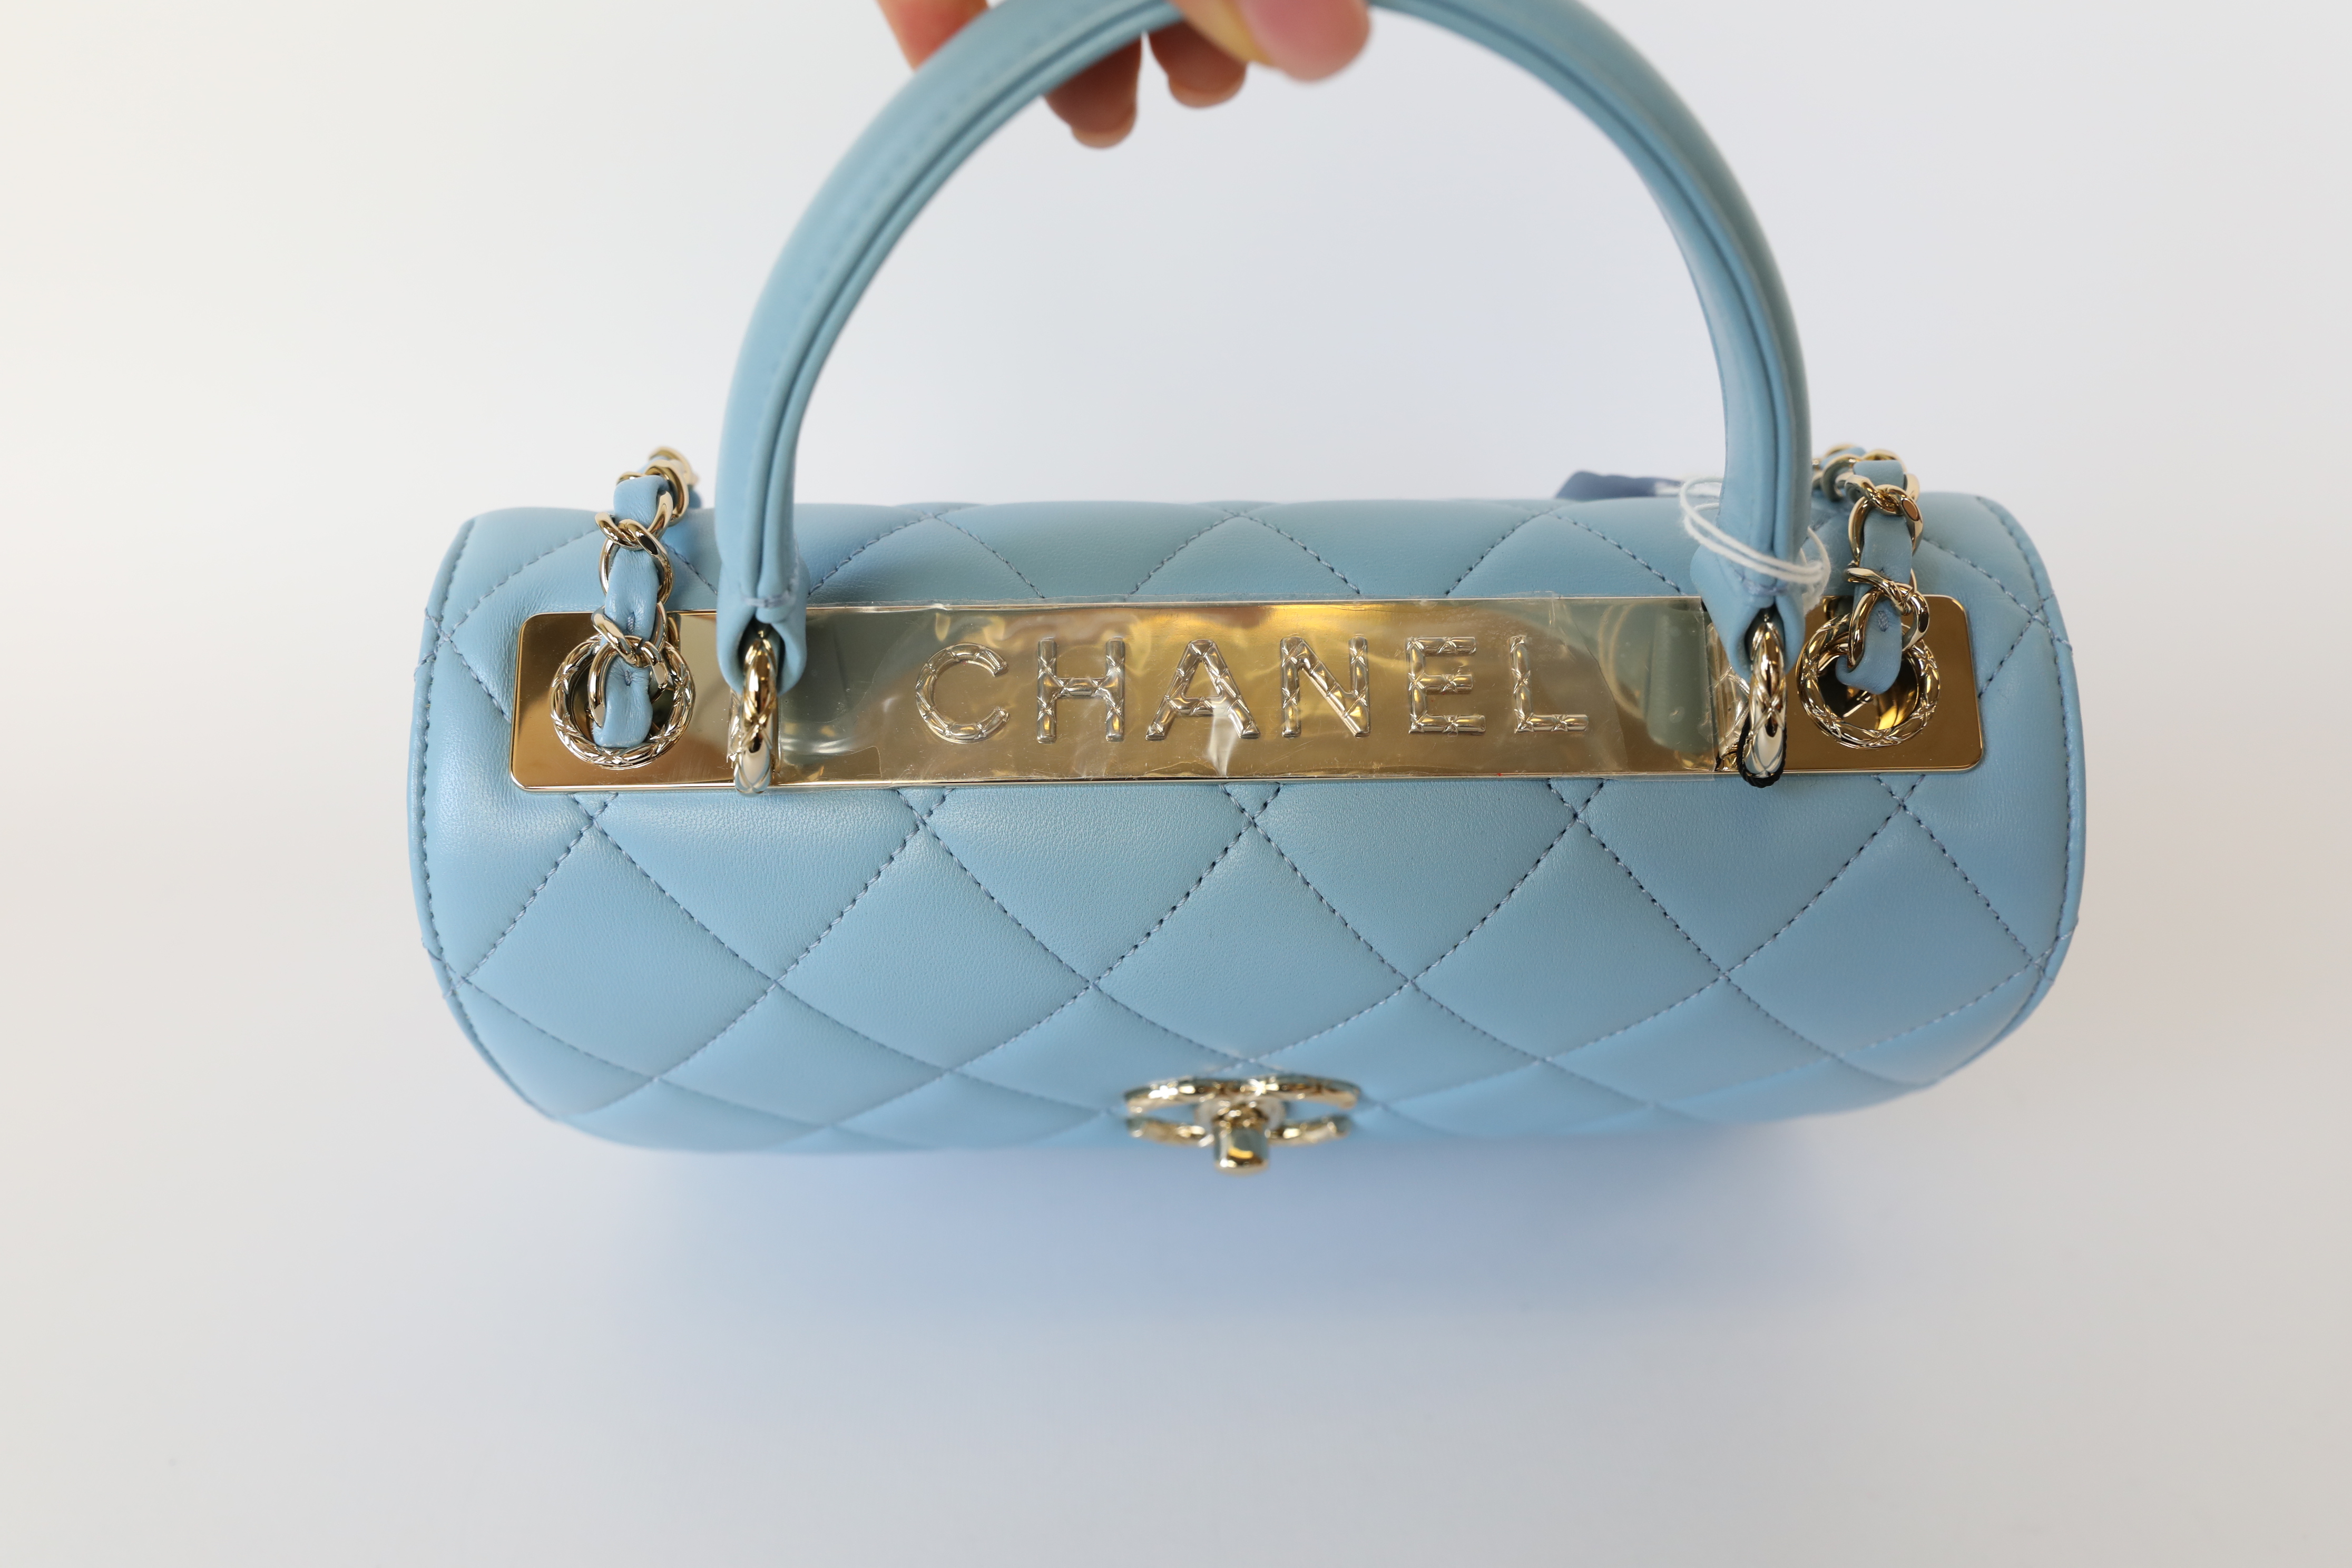 Chanel Trendy CC Small, Blue Lambskin with Gold Hardware, New in Box WA001